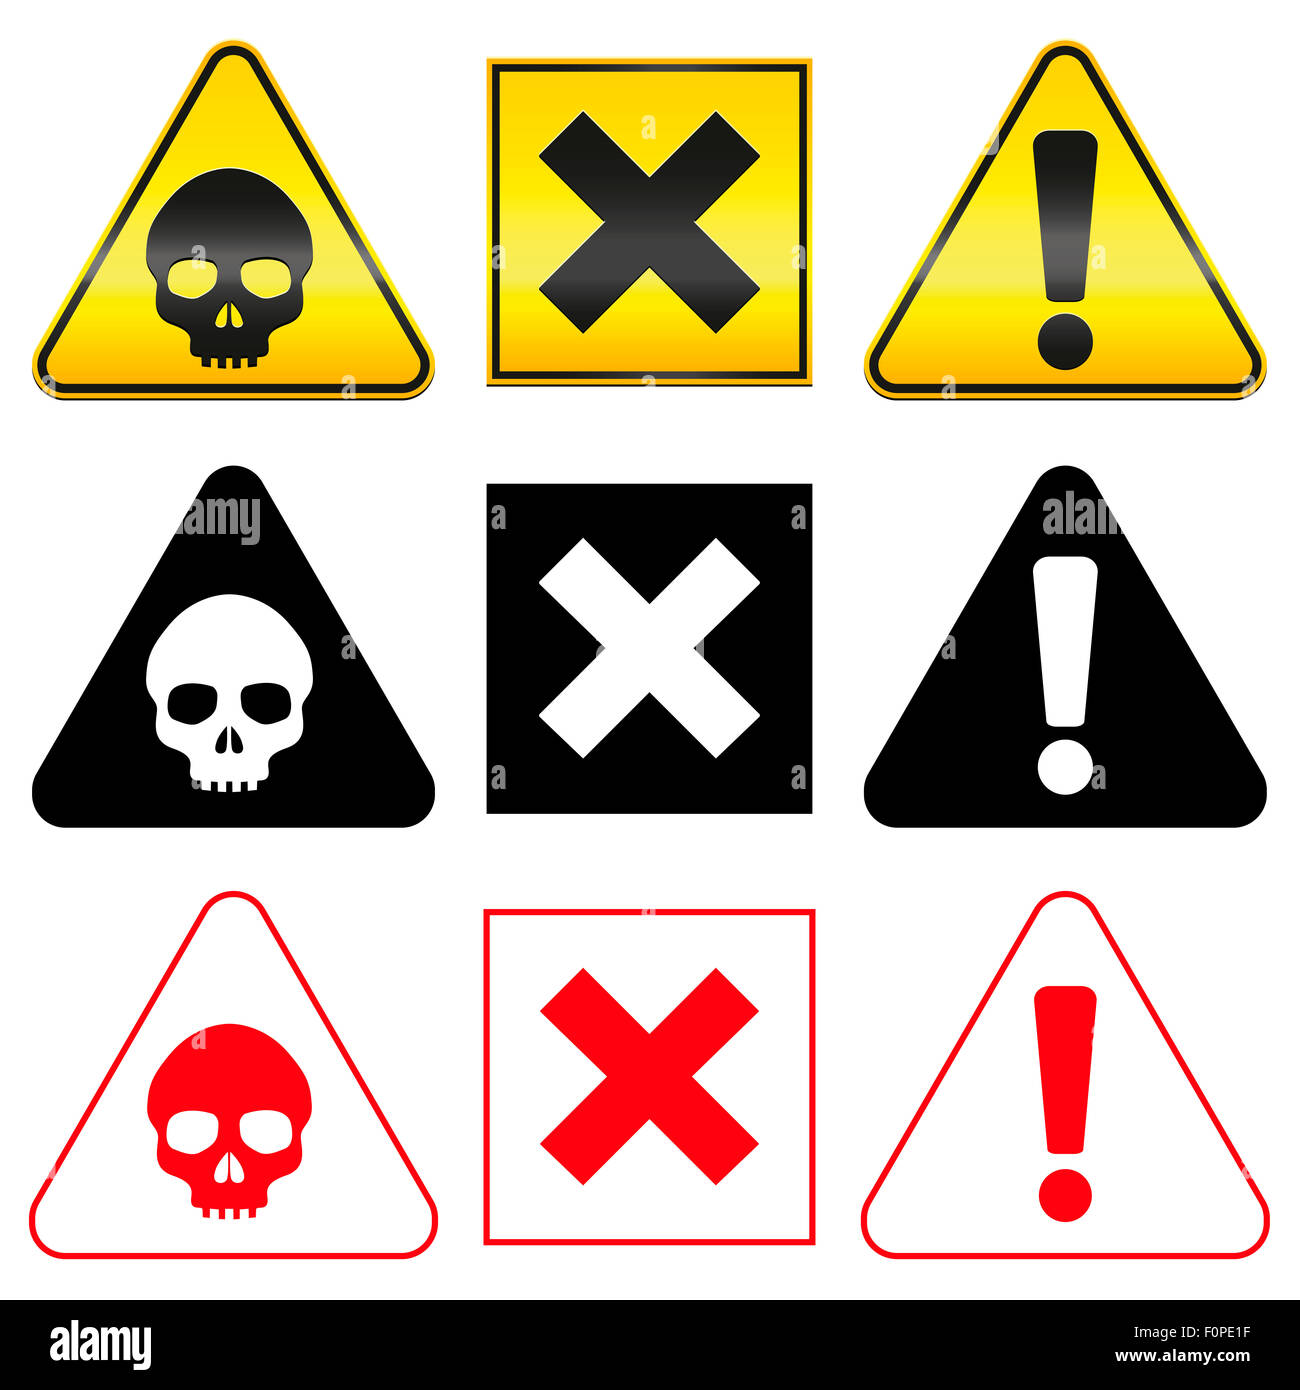 Warning hazard symbols - skull, cross and exclamation mark in yellow, red and black version. Stock Photo